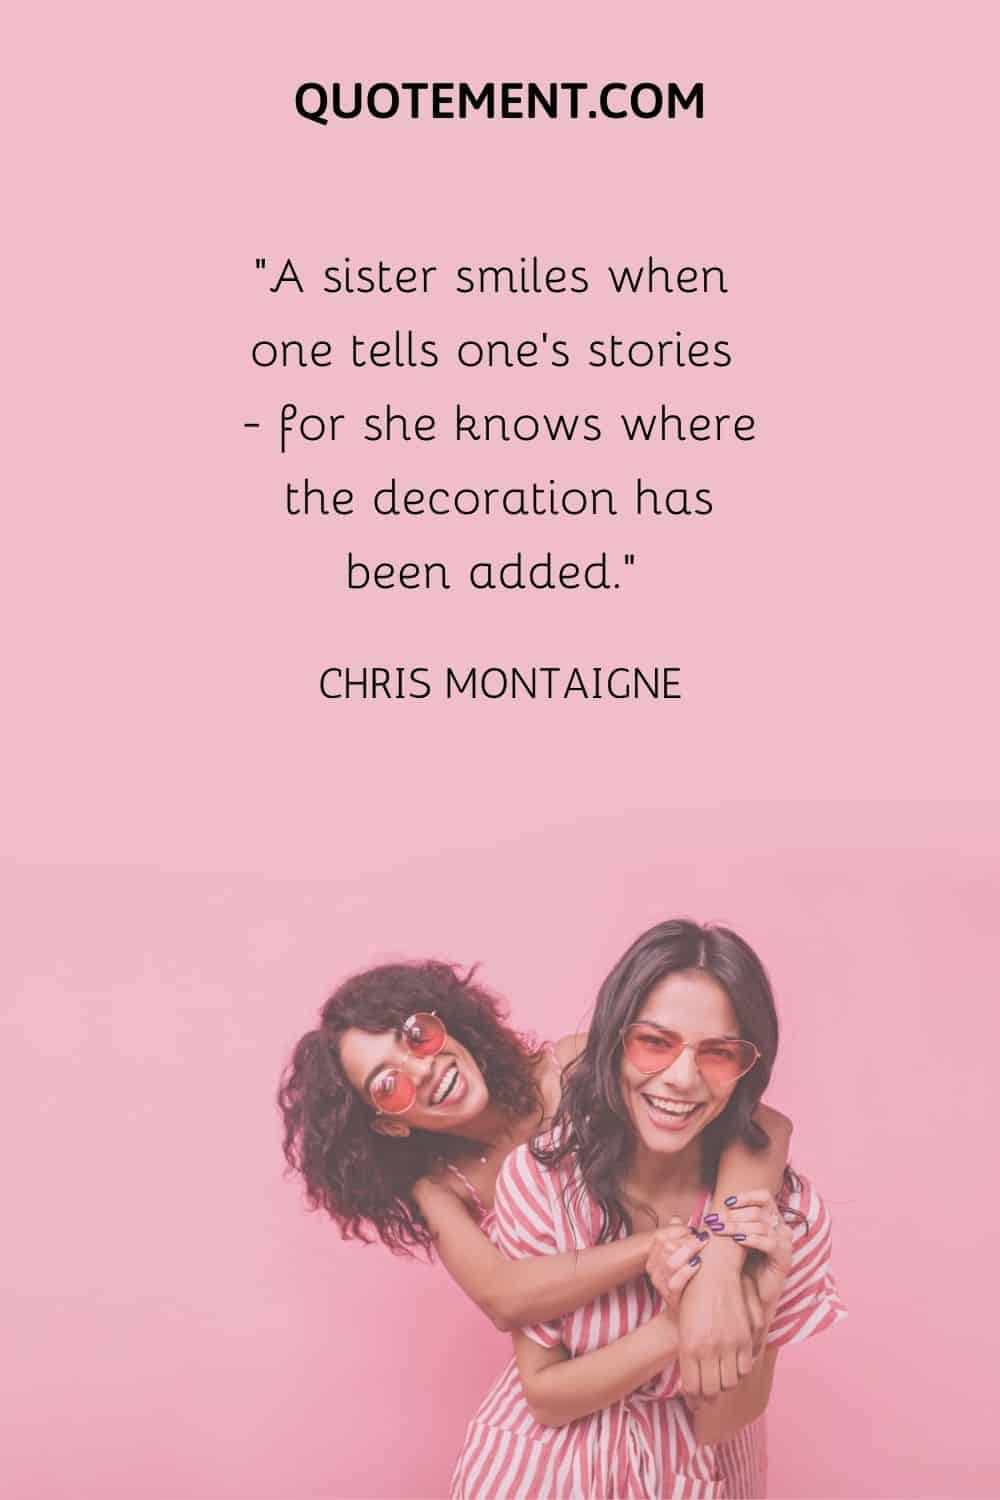 A sister smiles when one tells one’s stories — for she knows where the decoration has been added.